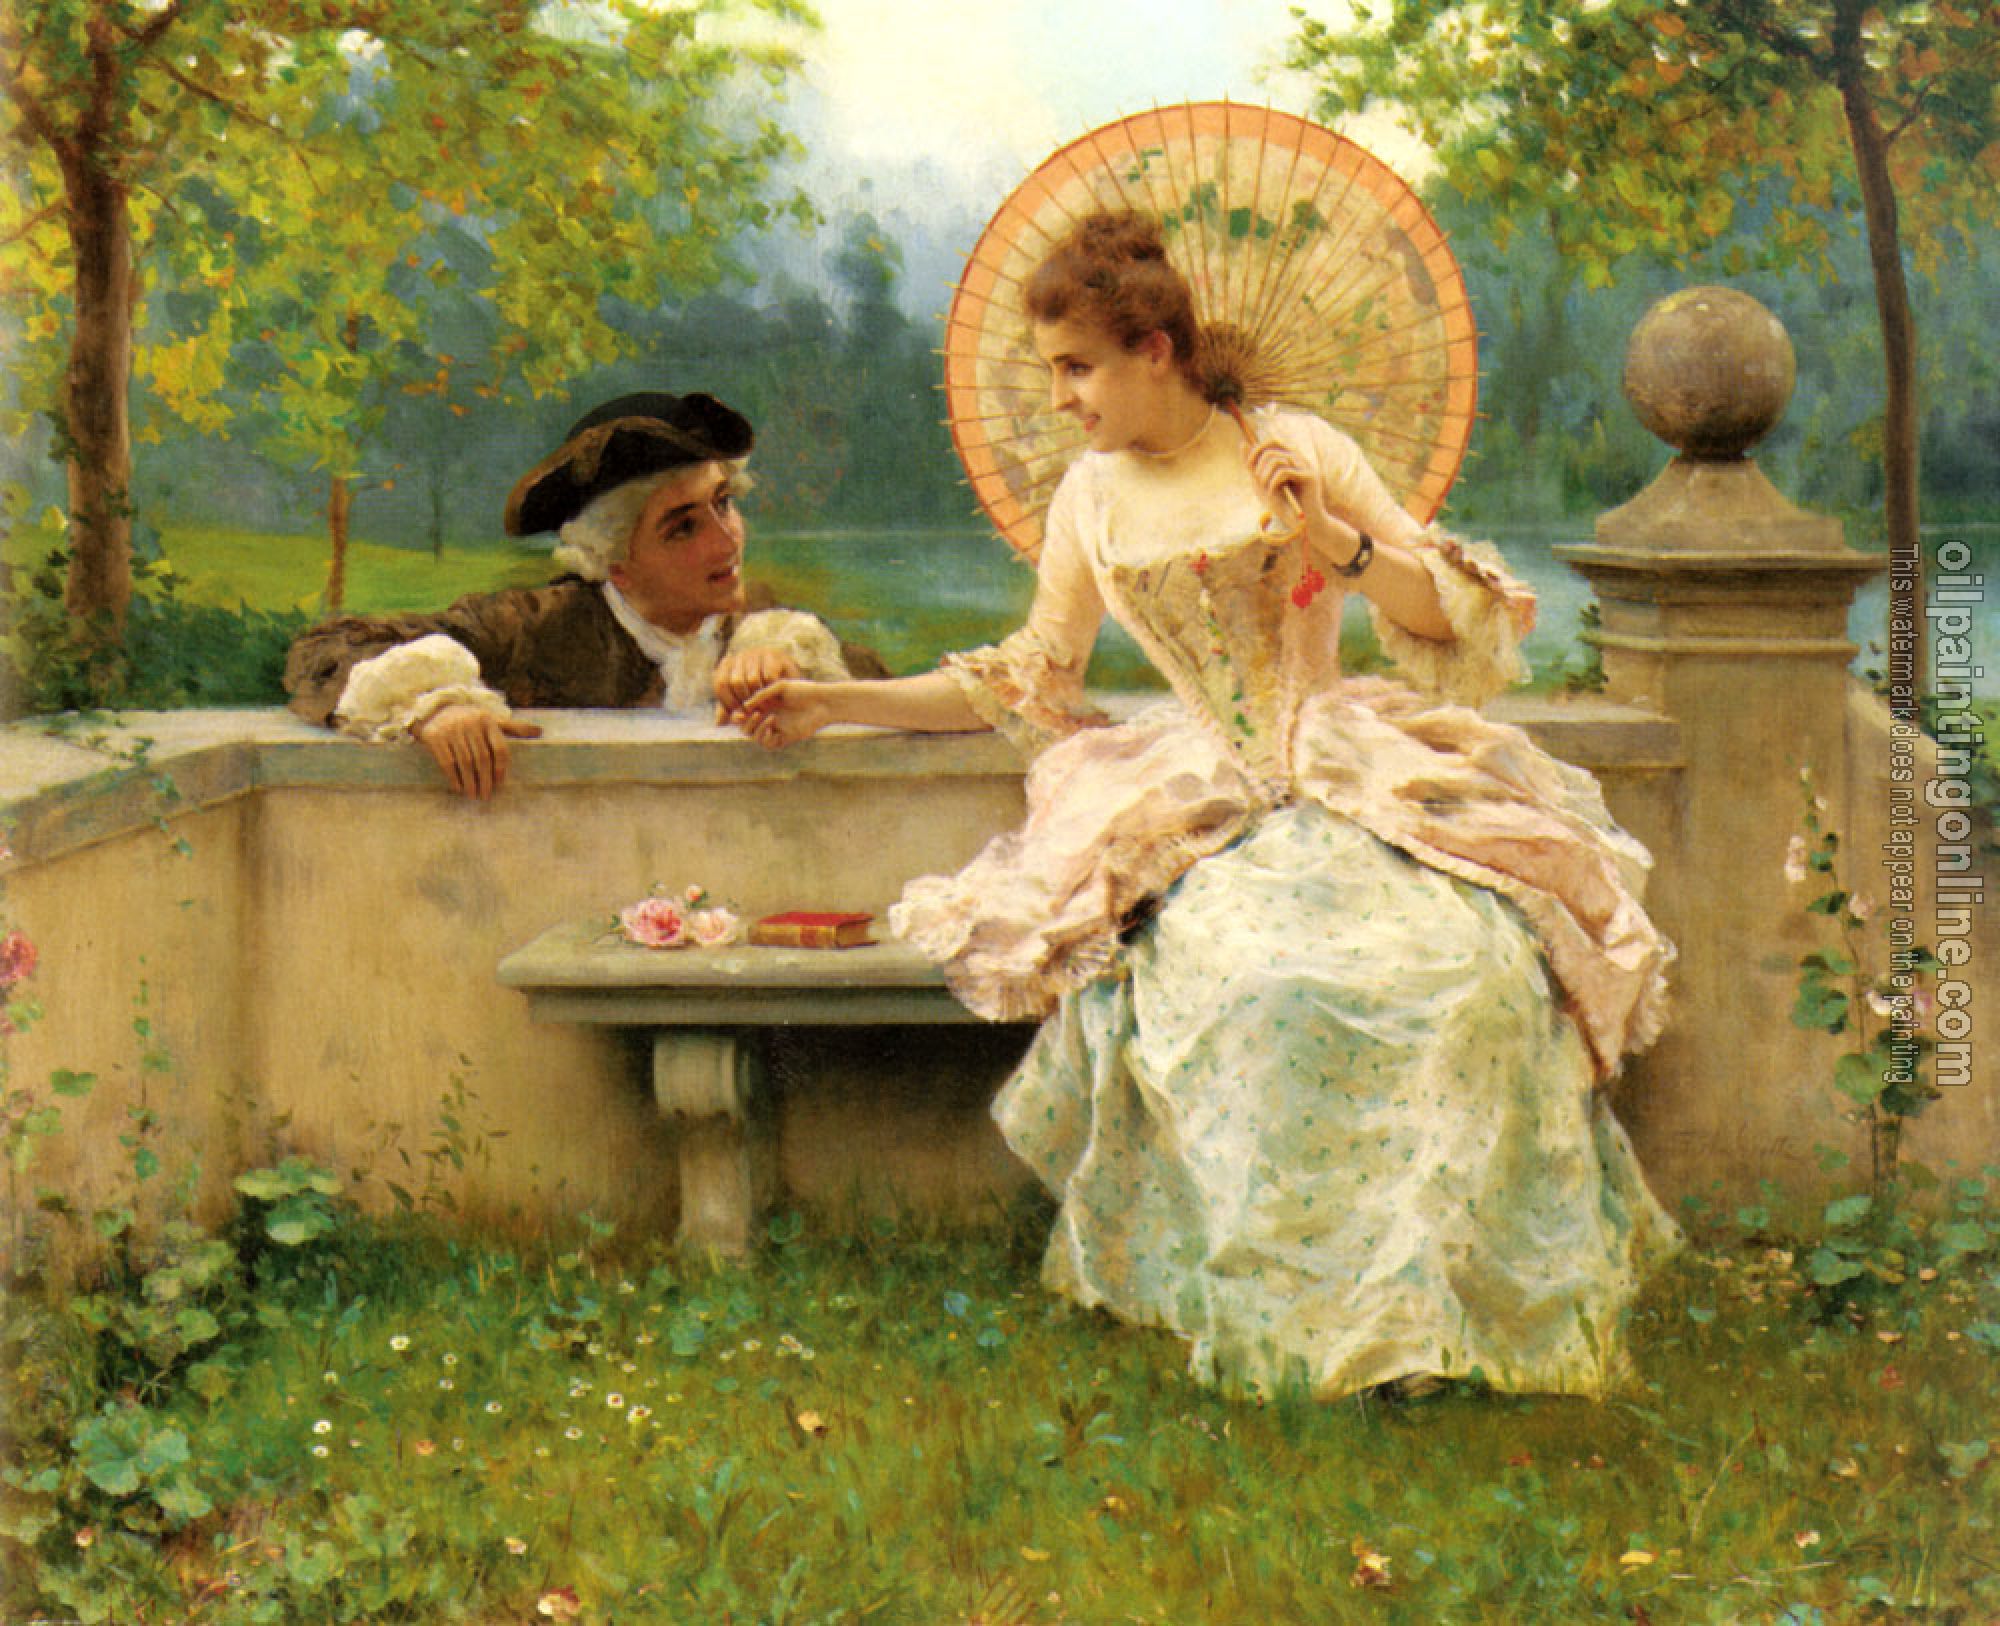 Federico Andreotti - A Tender Moment In The Garden